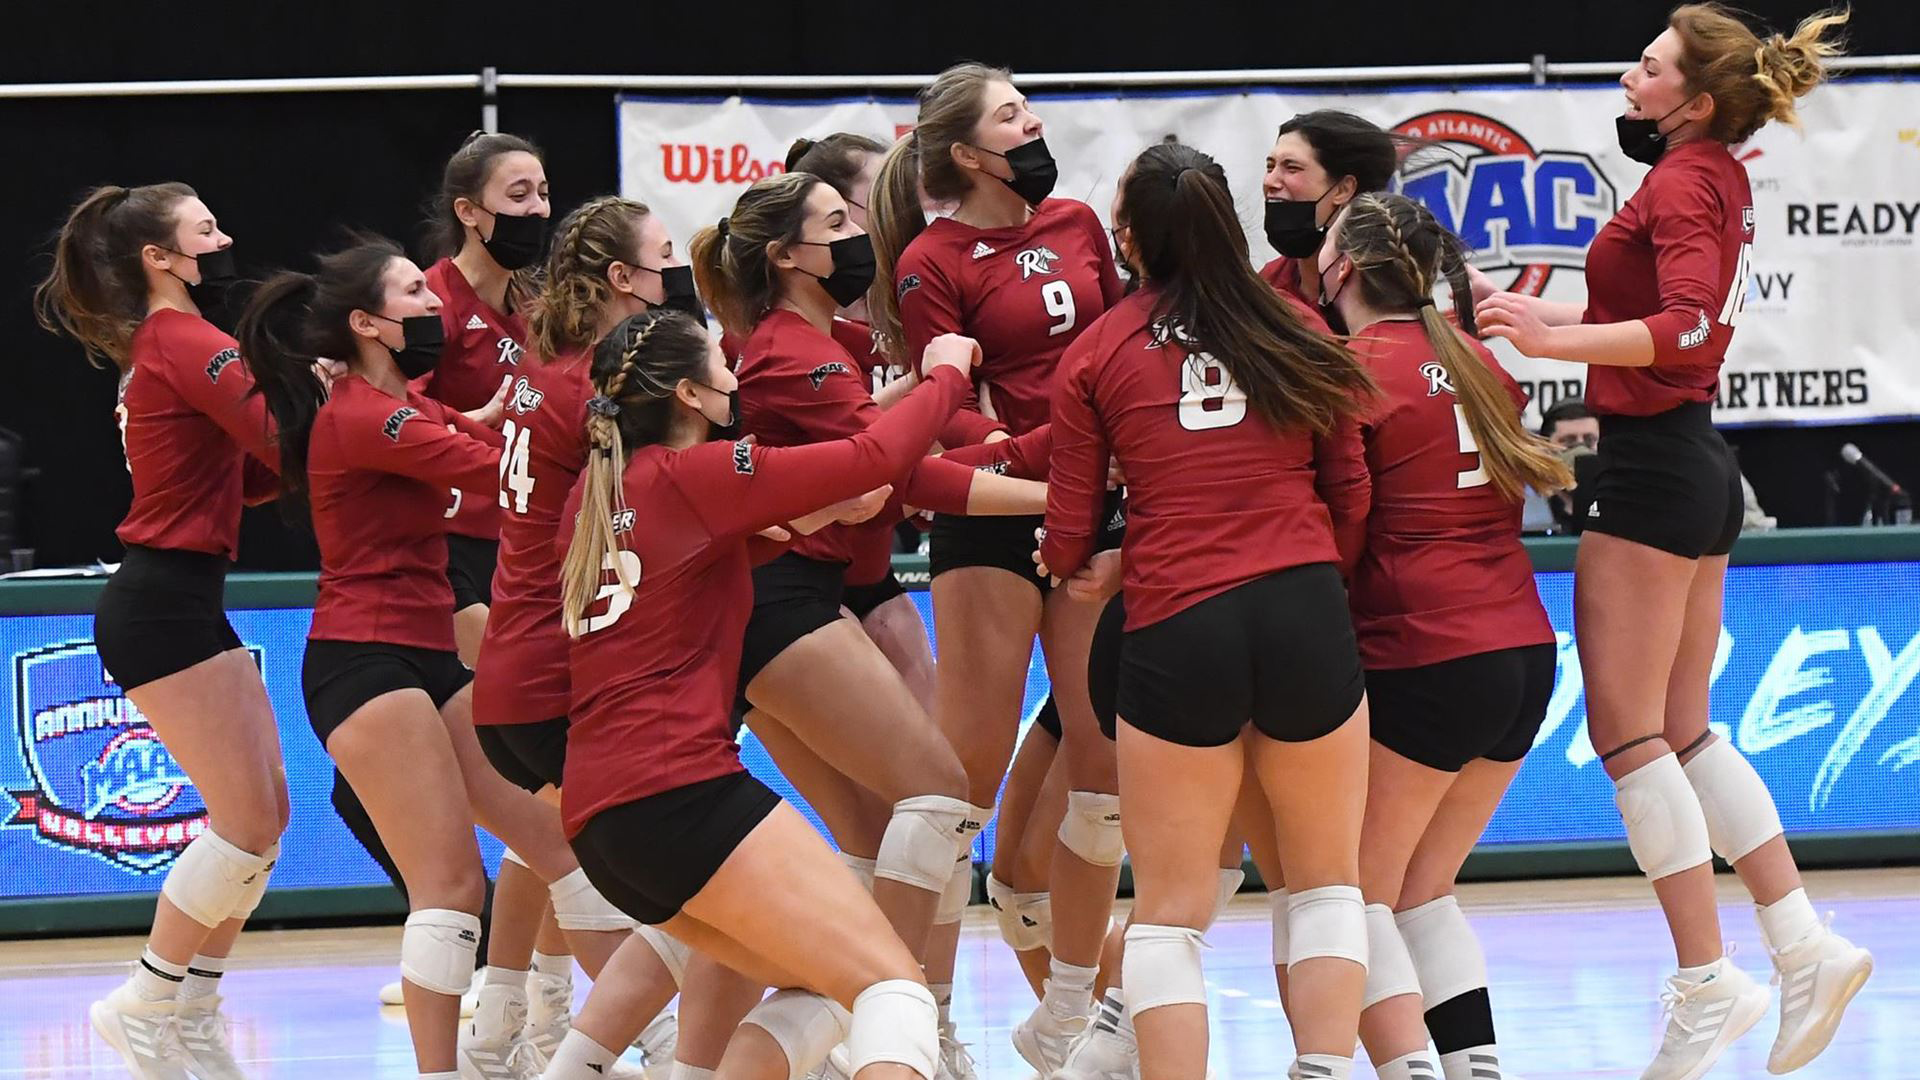 Volleyball team celebrates victory